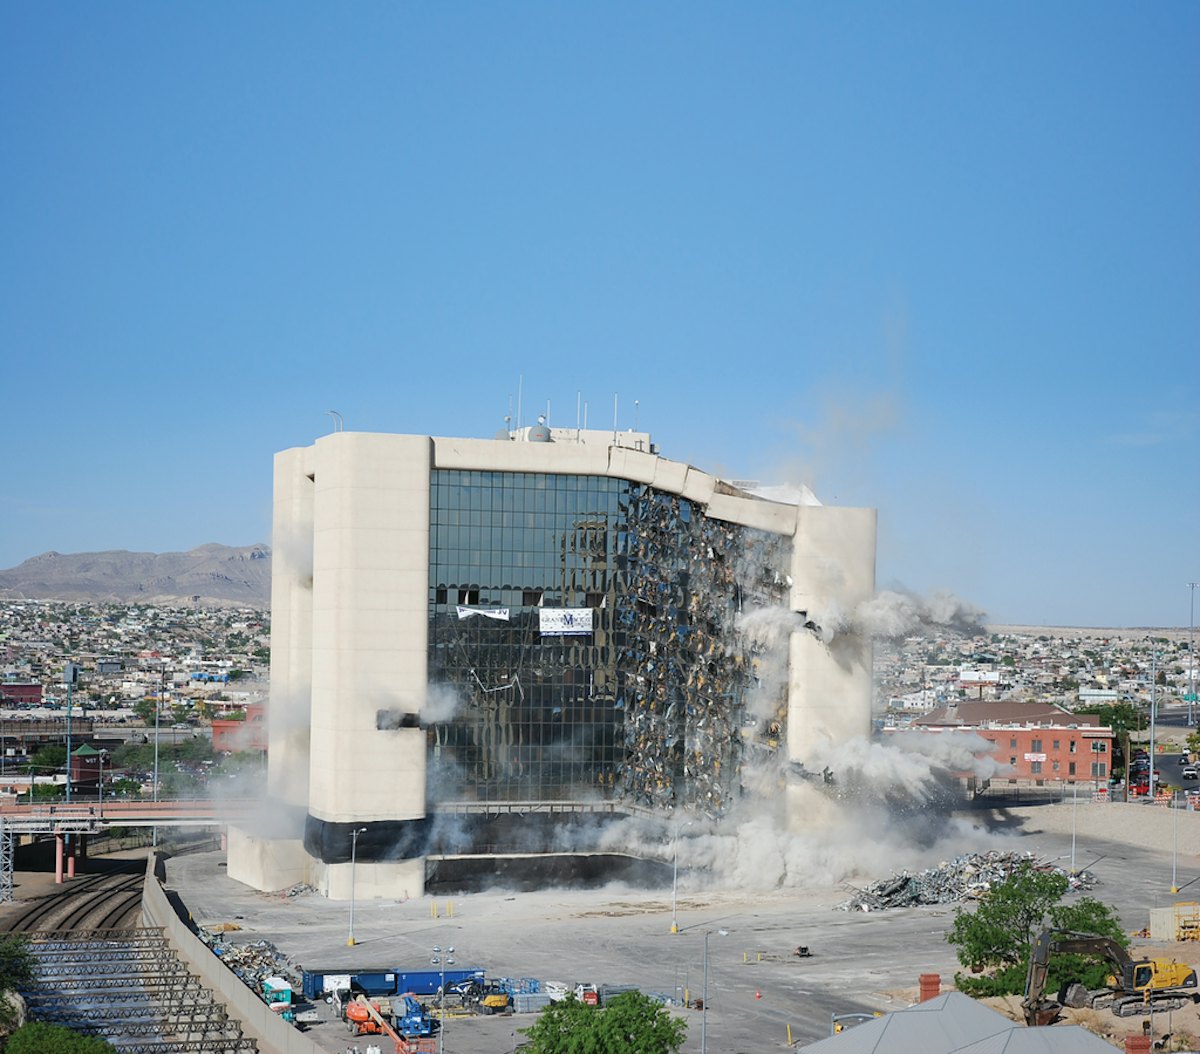 Contractors Team Up for Demolition and Implosion of El Paso City Hall